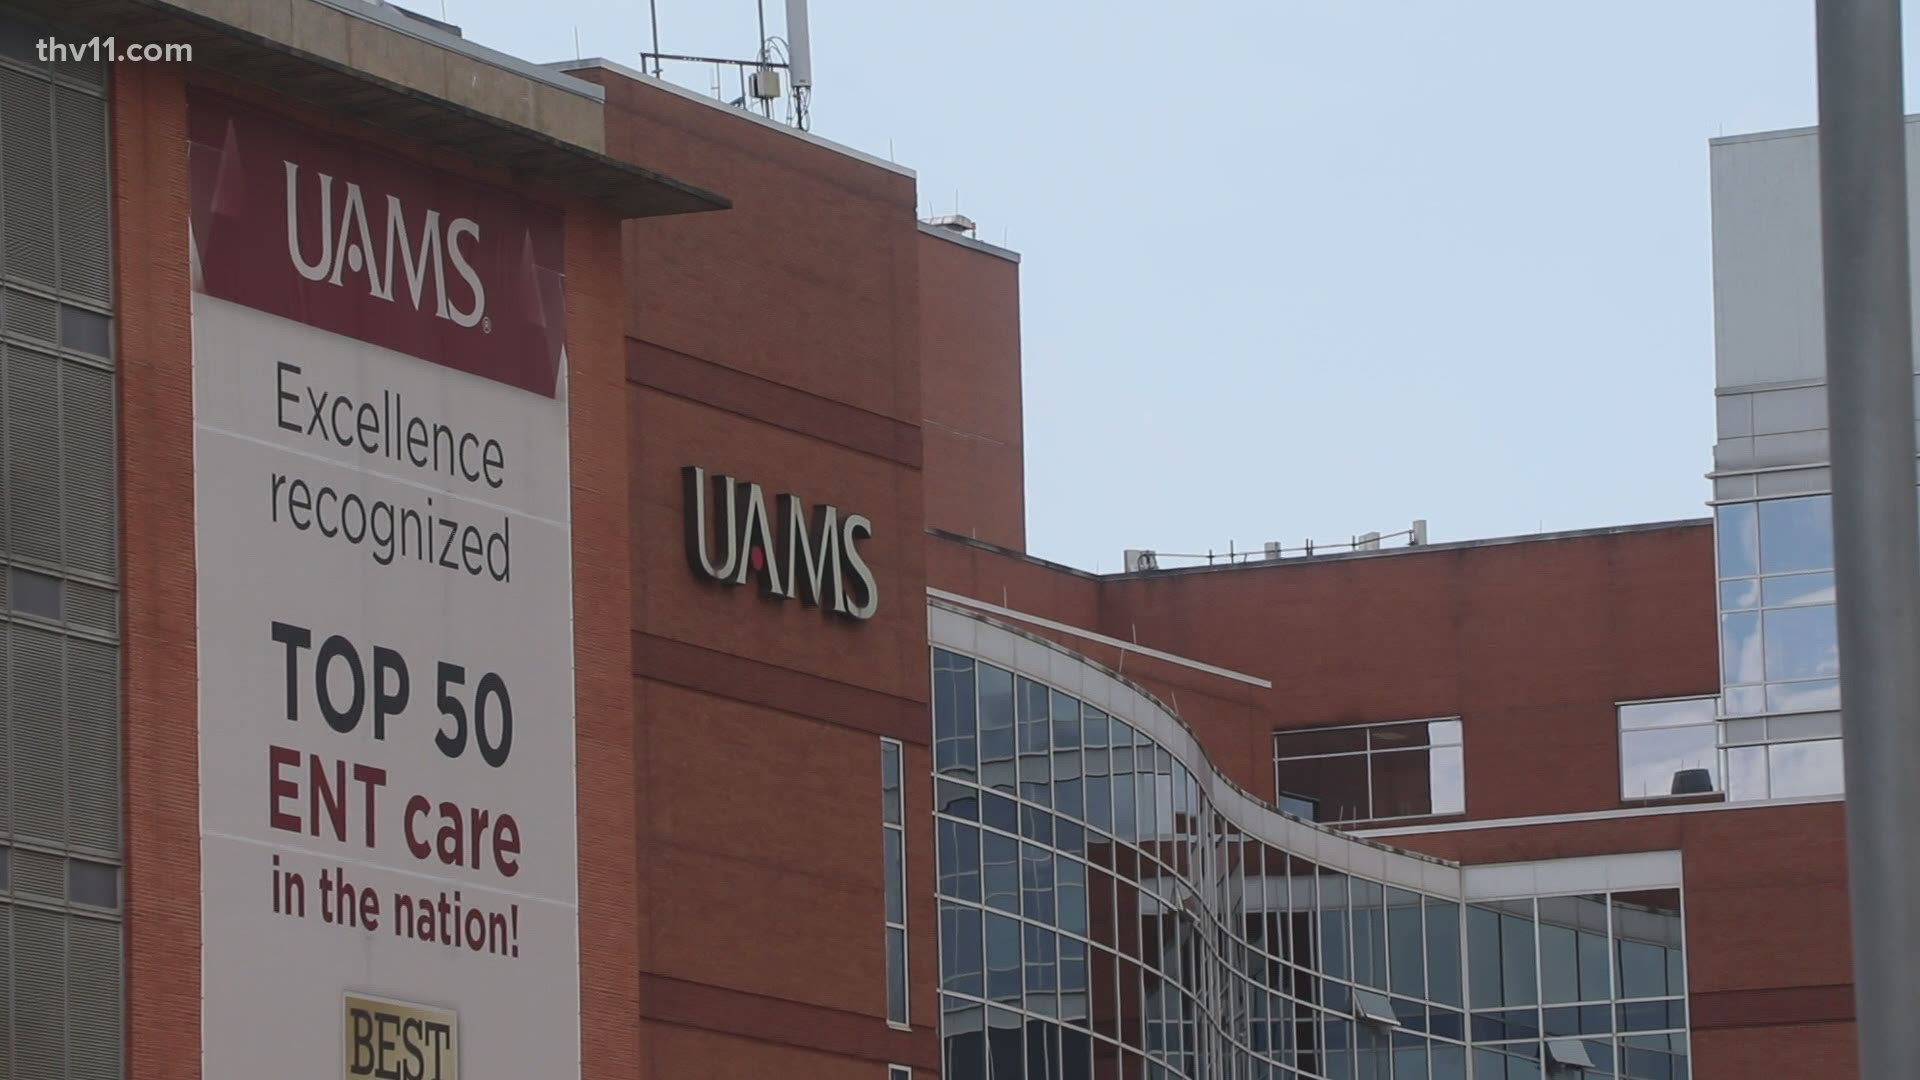 COVID-19 cases around Arkansas are continuing to increase. UAMS announced that they are running out of caregivers to accommodate for the large amount of patients.